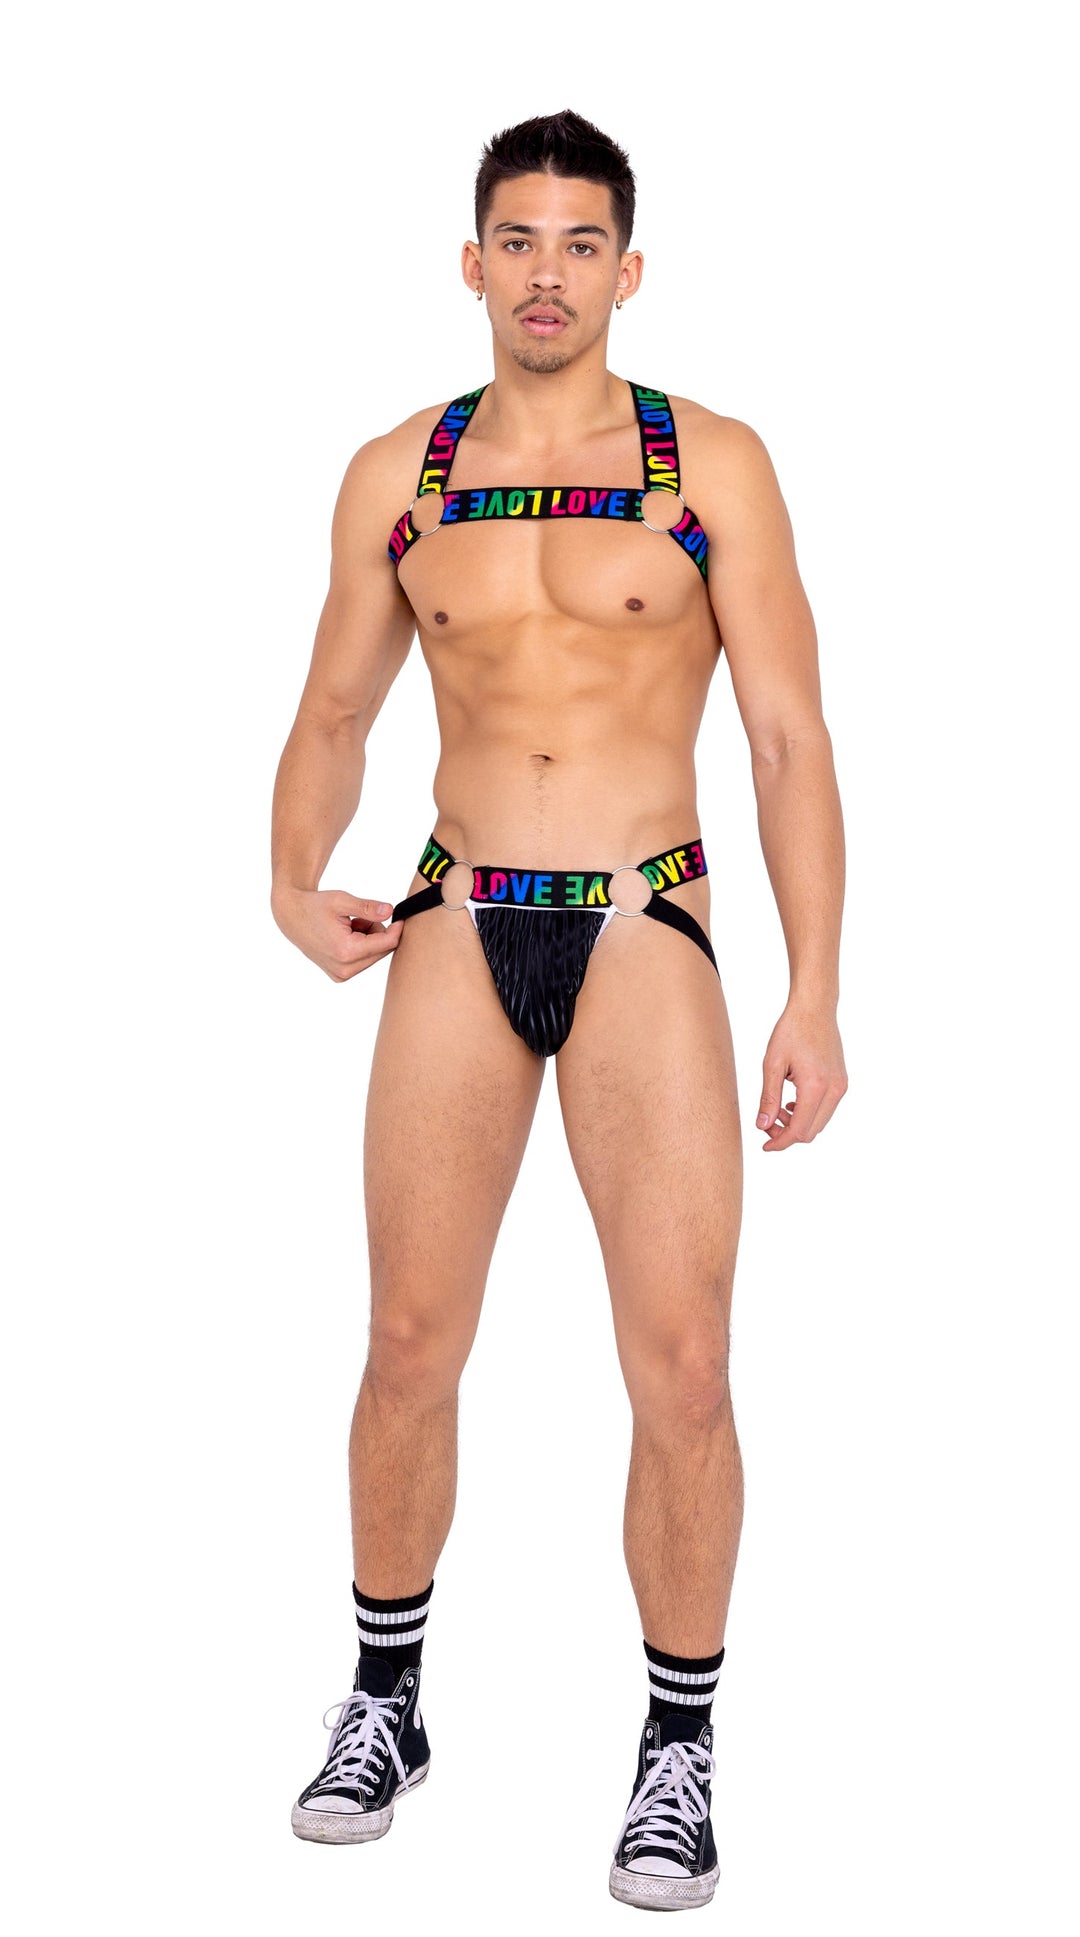 Pride Harness with Chain & Ring Detail Men's Costume